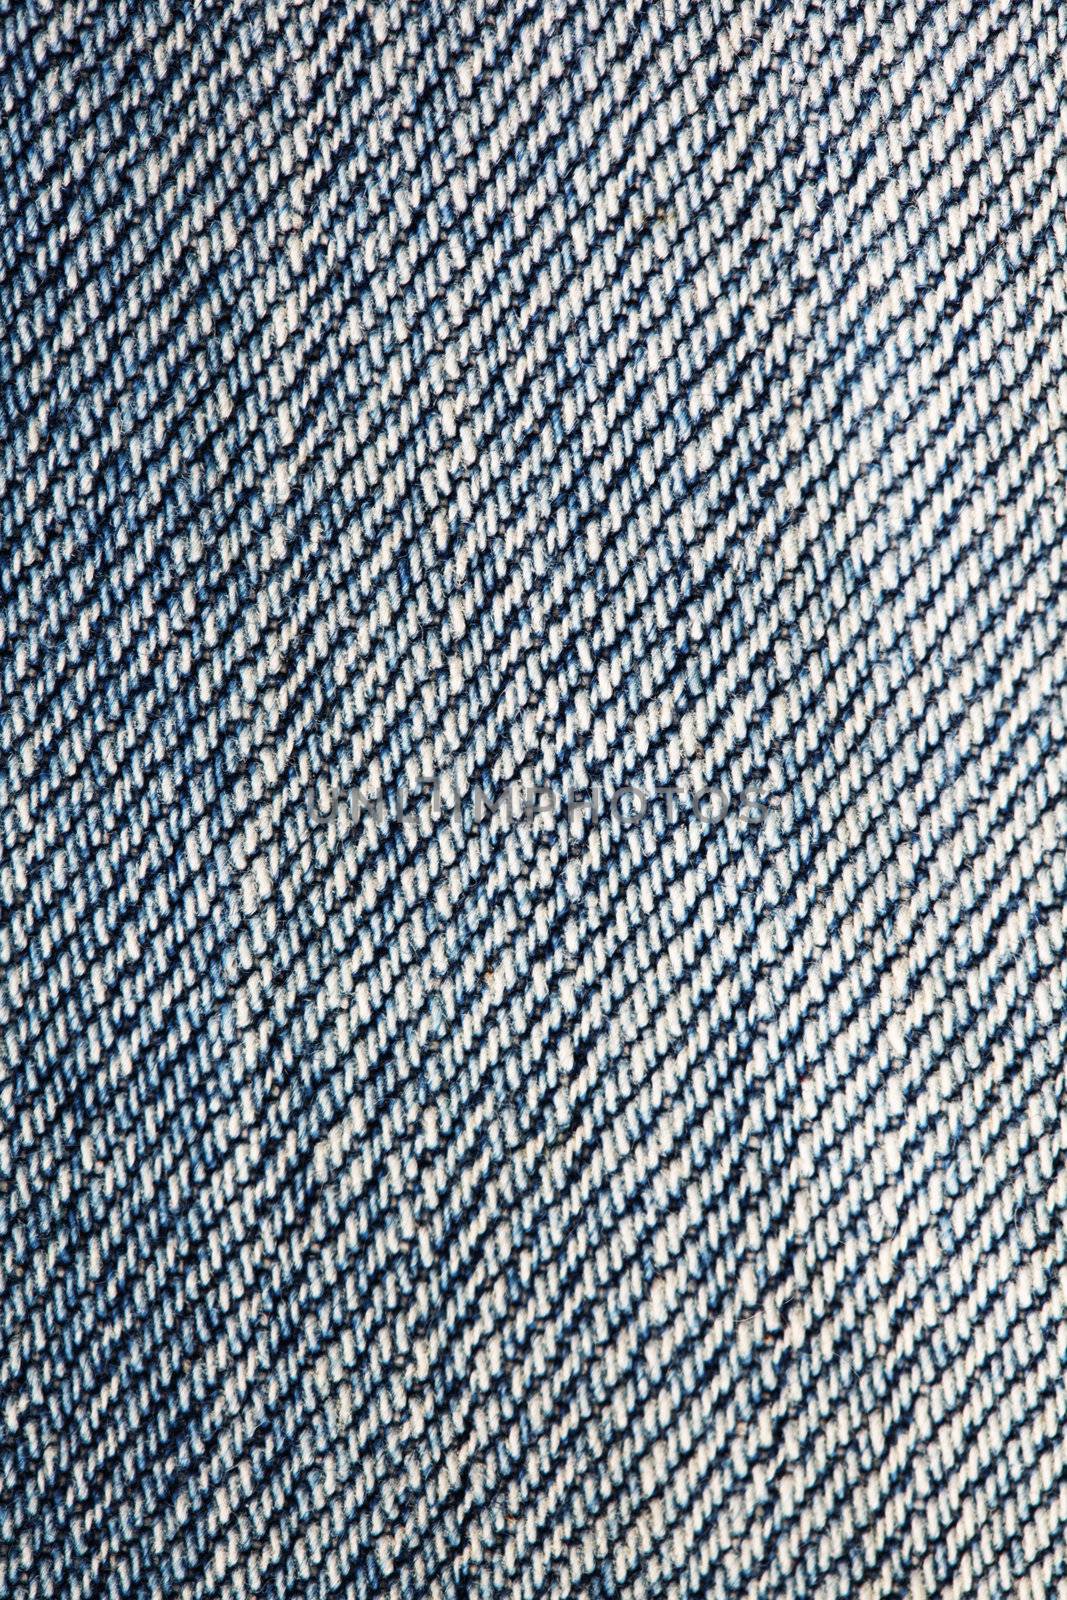 jeans background by Yellowj